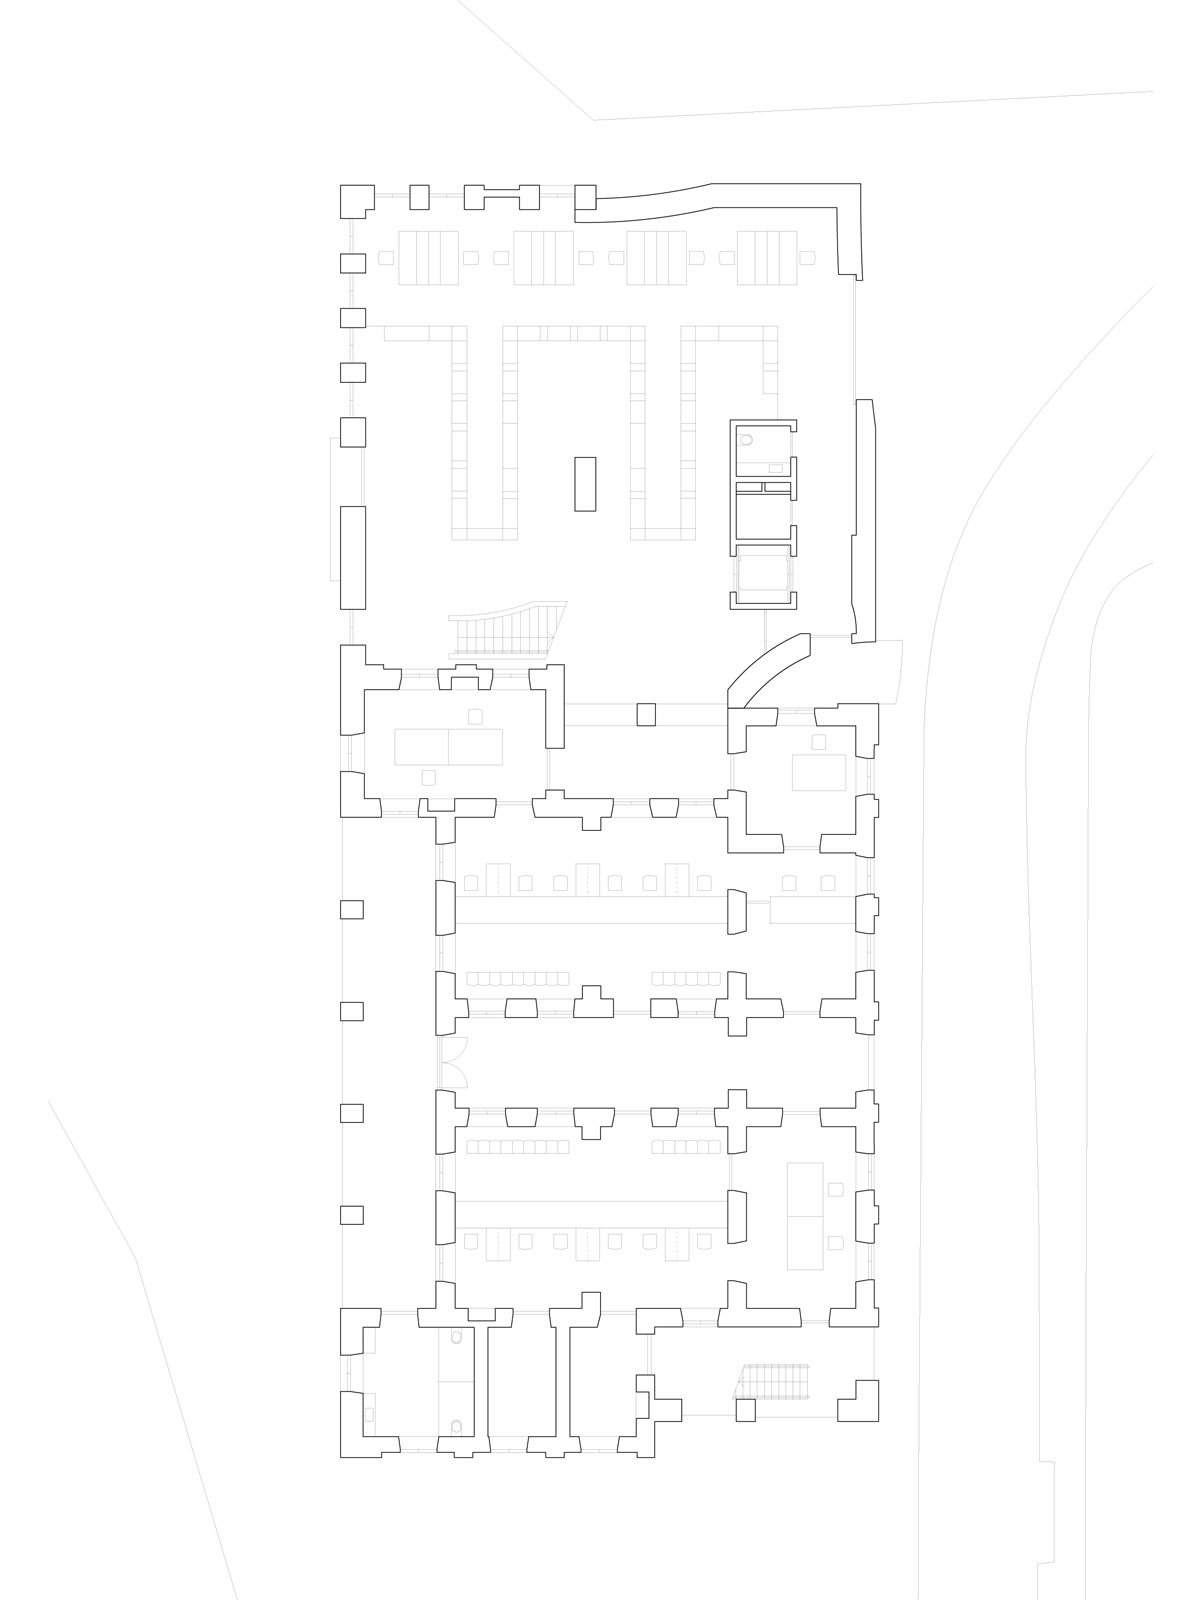 Image of 20220802 AnneHoltrop Manama Plans 1 in Manama post office - Cosentino